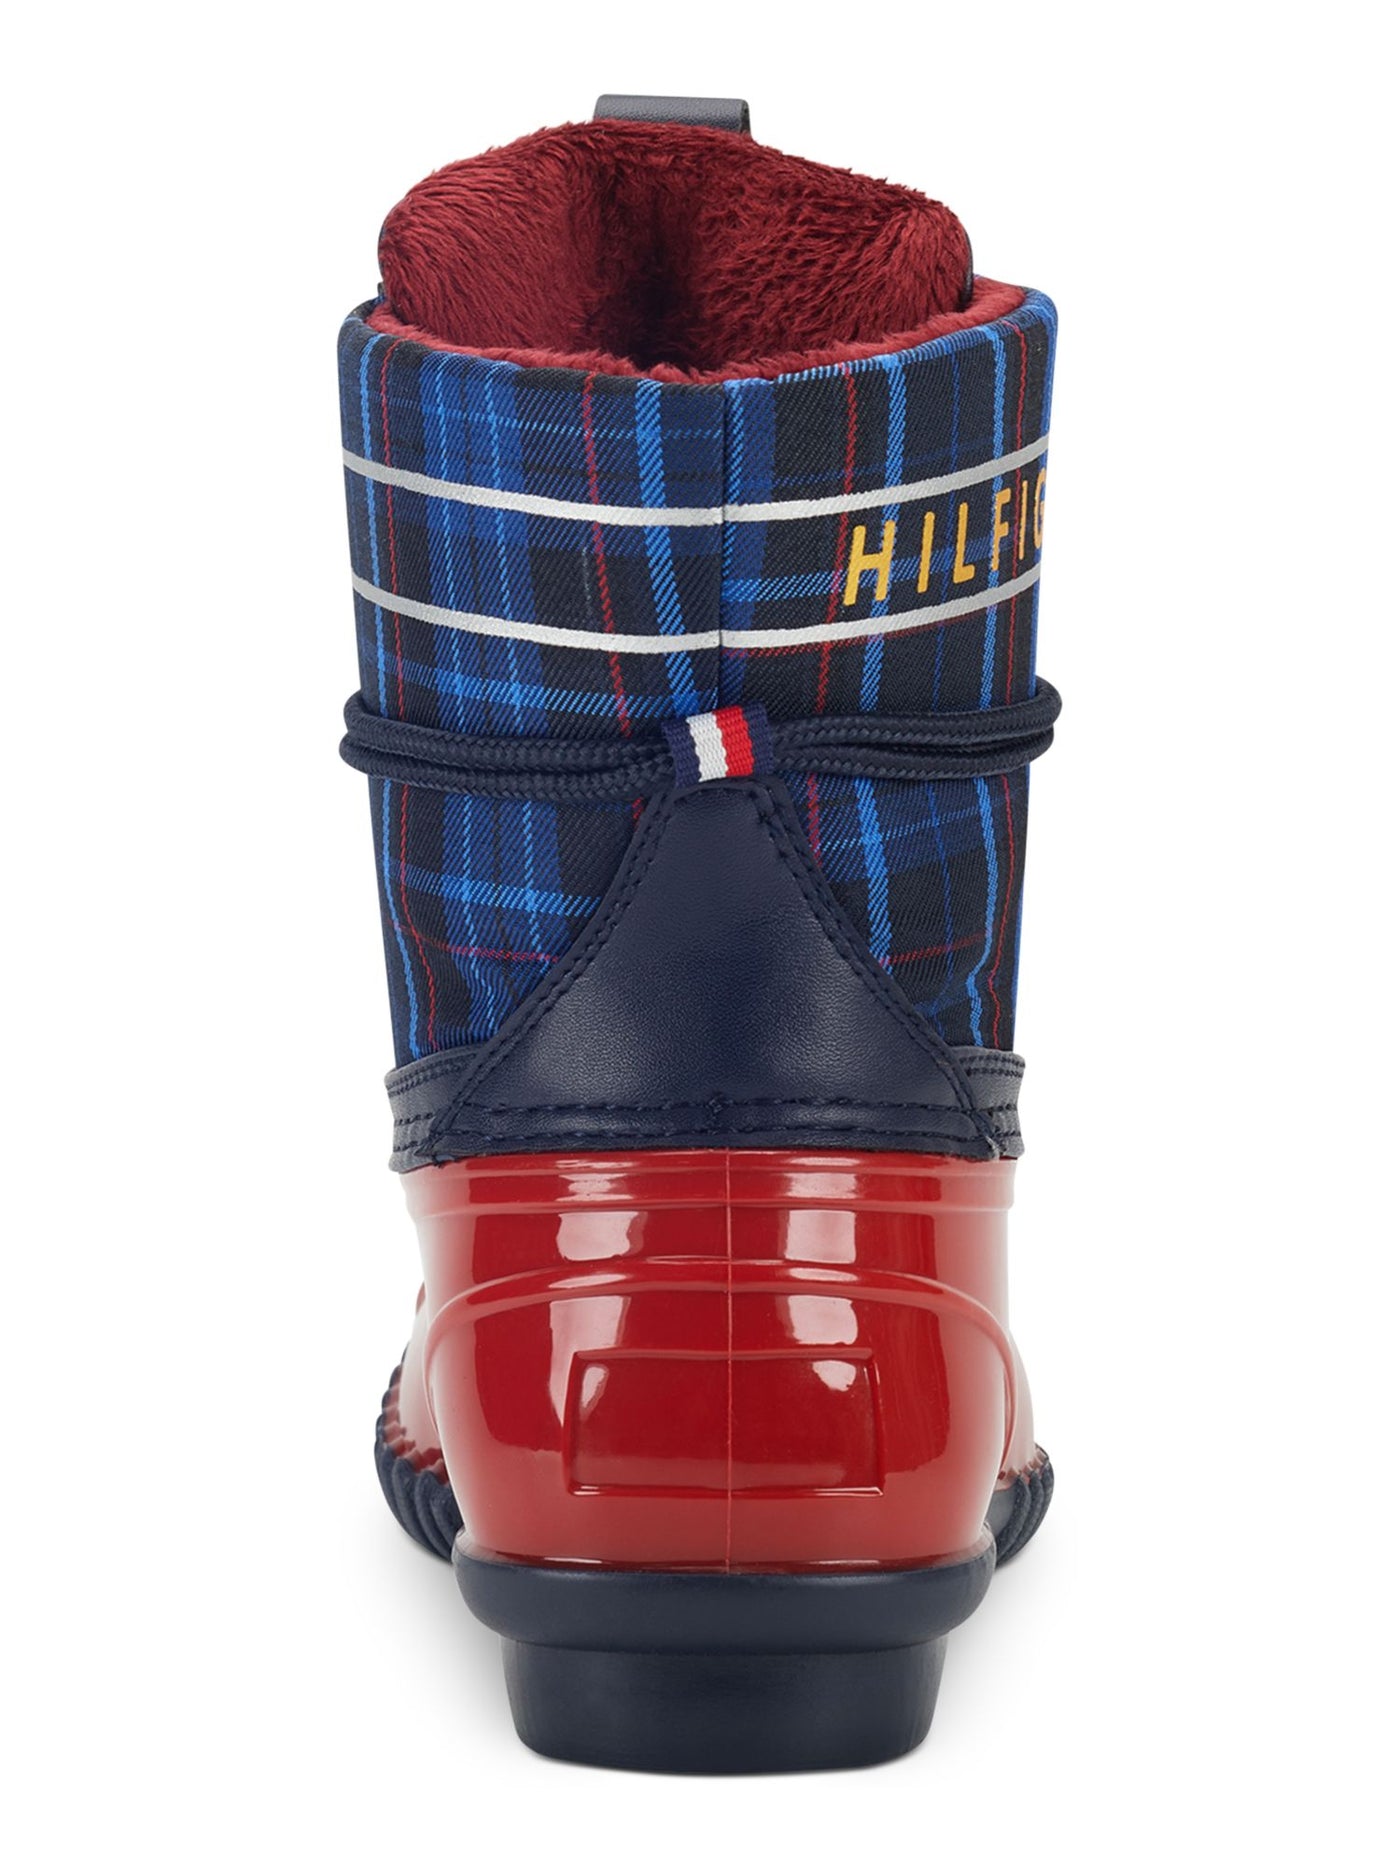 TOMMY HILFIGER Womens Red Plaid Front And Back Pull Tag Logo Padded Comfort Waterproof Eyelet Hessa Round Toe Block Heel Lace-Up Duck Boots 6